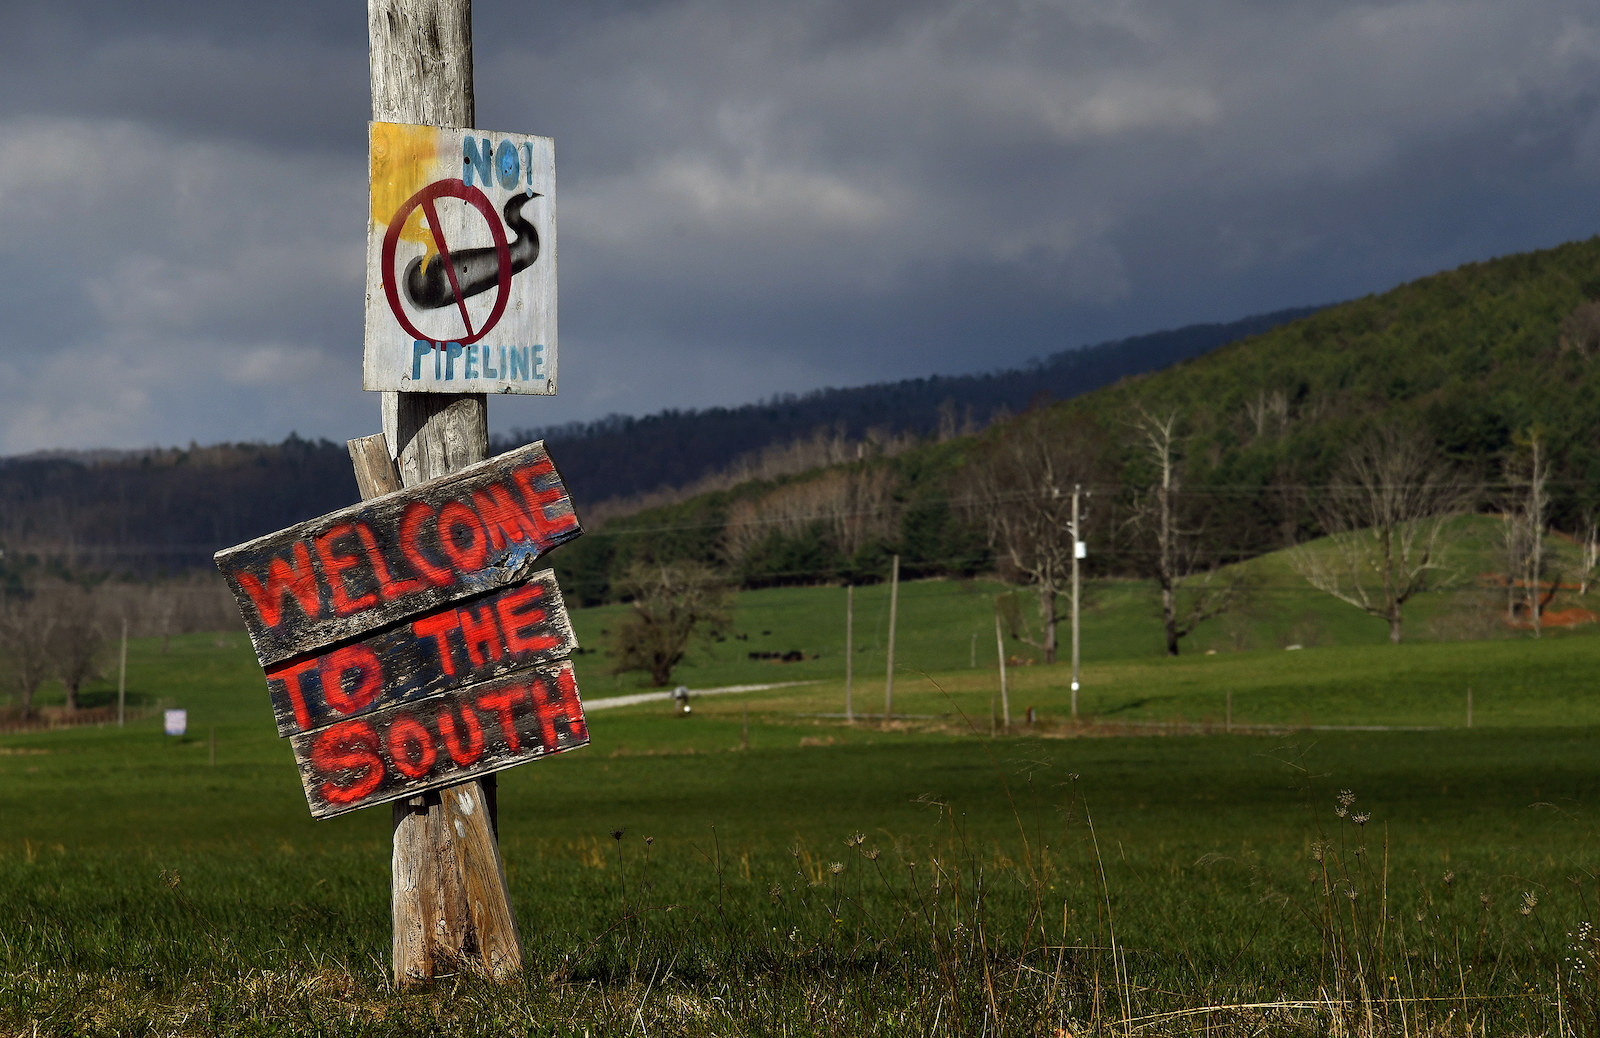 There are many hand painted signs along the roads near Bent Mountain, Virginia to protest against the Mountain Valley Pipeline Project.